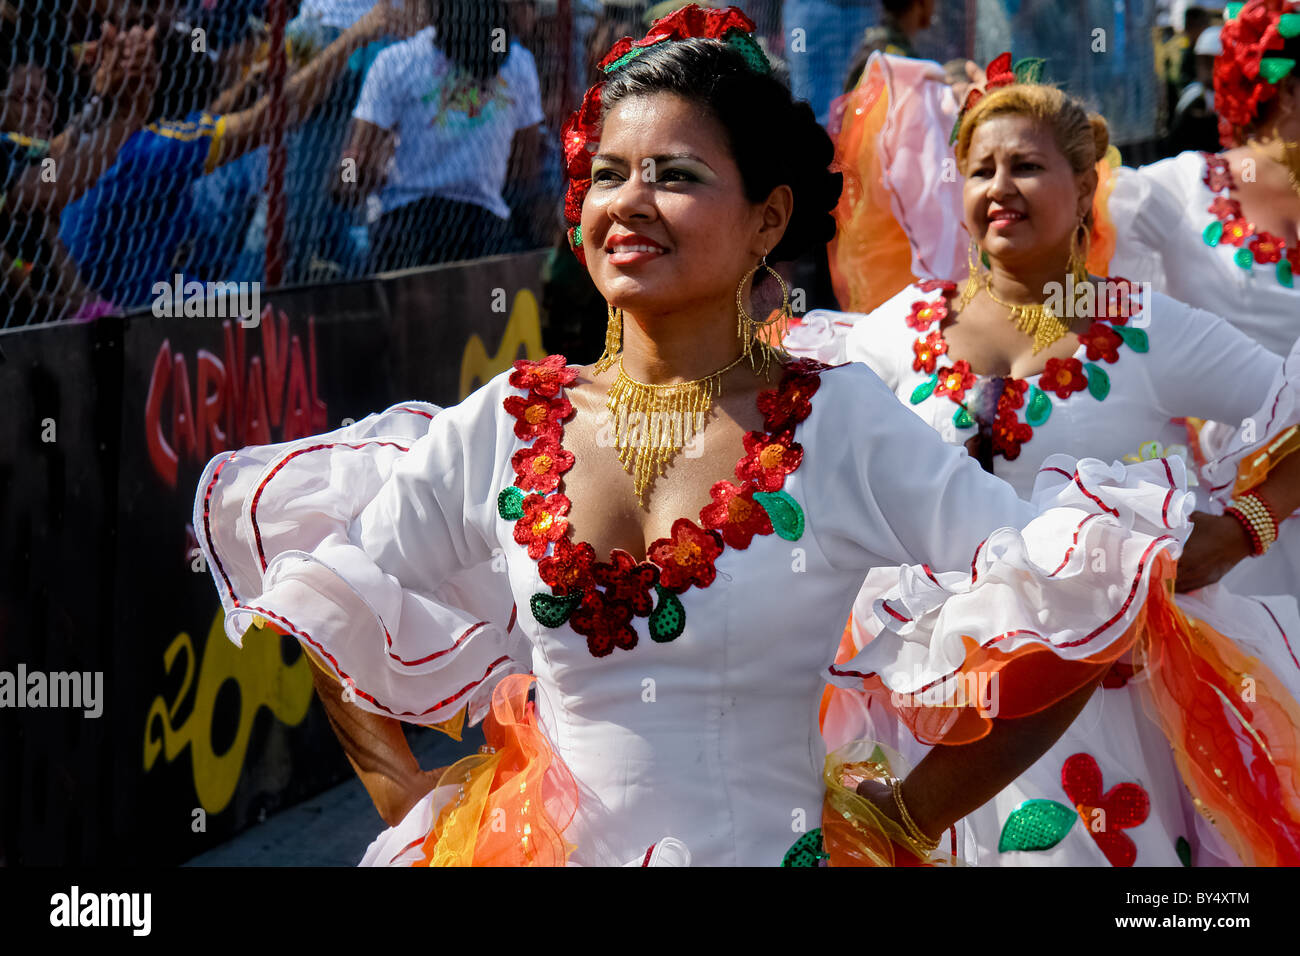 Colombian women dance Cumbia during the Carnival in Barranquilla, Colombia. Stock Photo